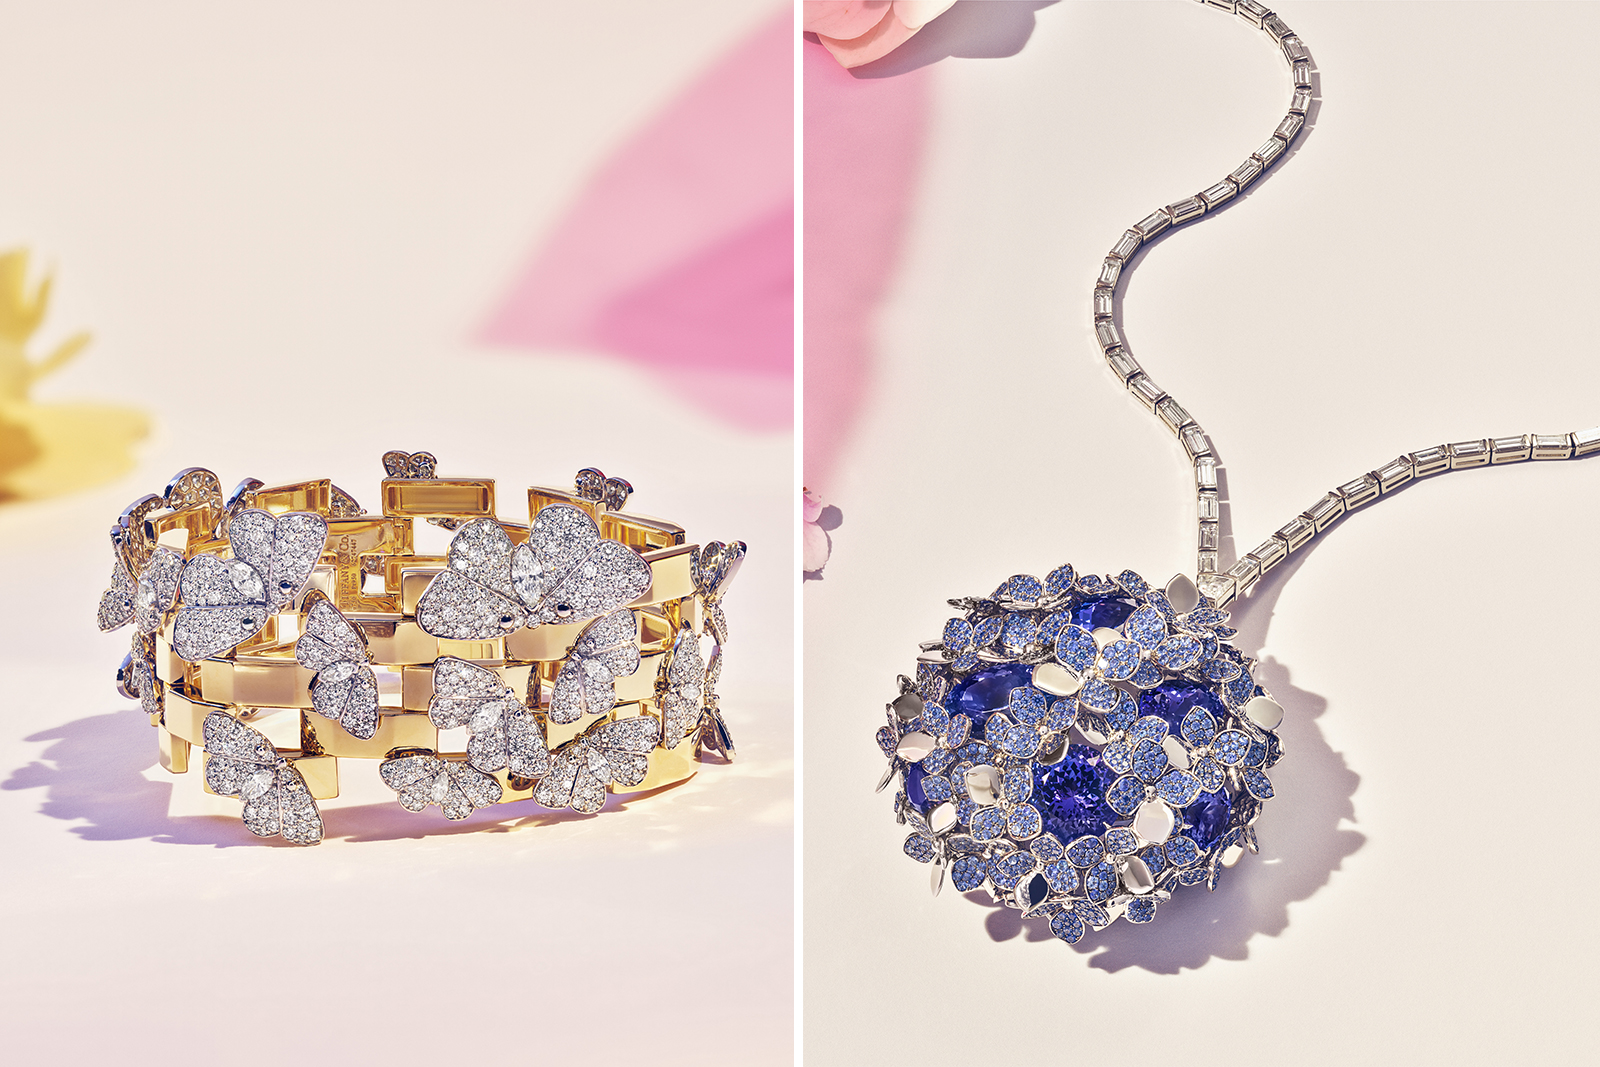 Tiffany & Co. Blue Book 2018 collection bracelet in 18k yellow gold and platinum with mixed-cut diamonds, over eight total carats and pendant in platinum with round and oval tanzanites, over 43 total carats, baguette and custom-cut diamonds, over 33 total carats, and round sapphires, over 18 total carats